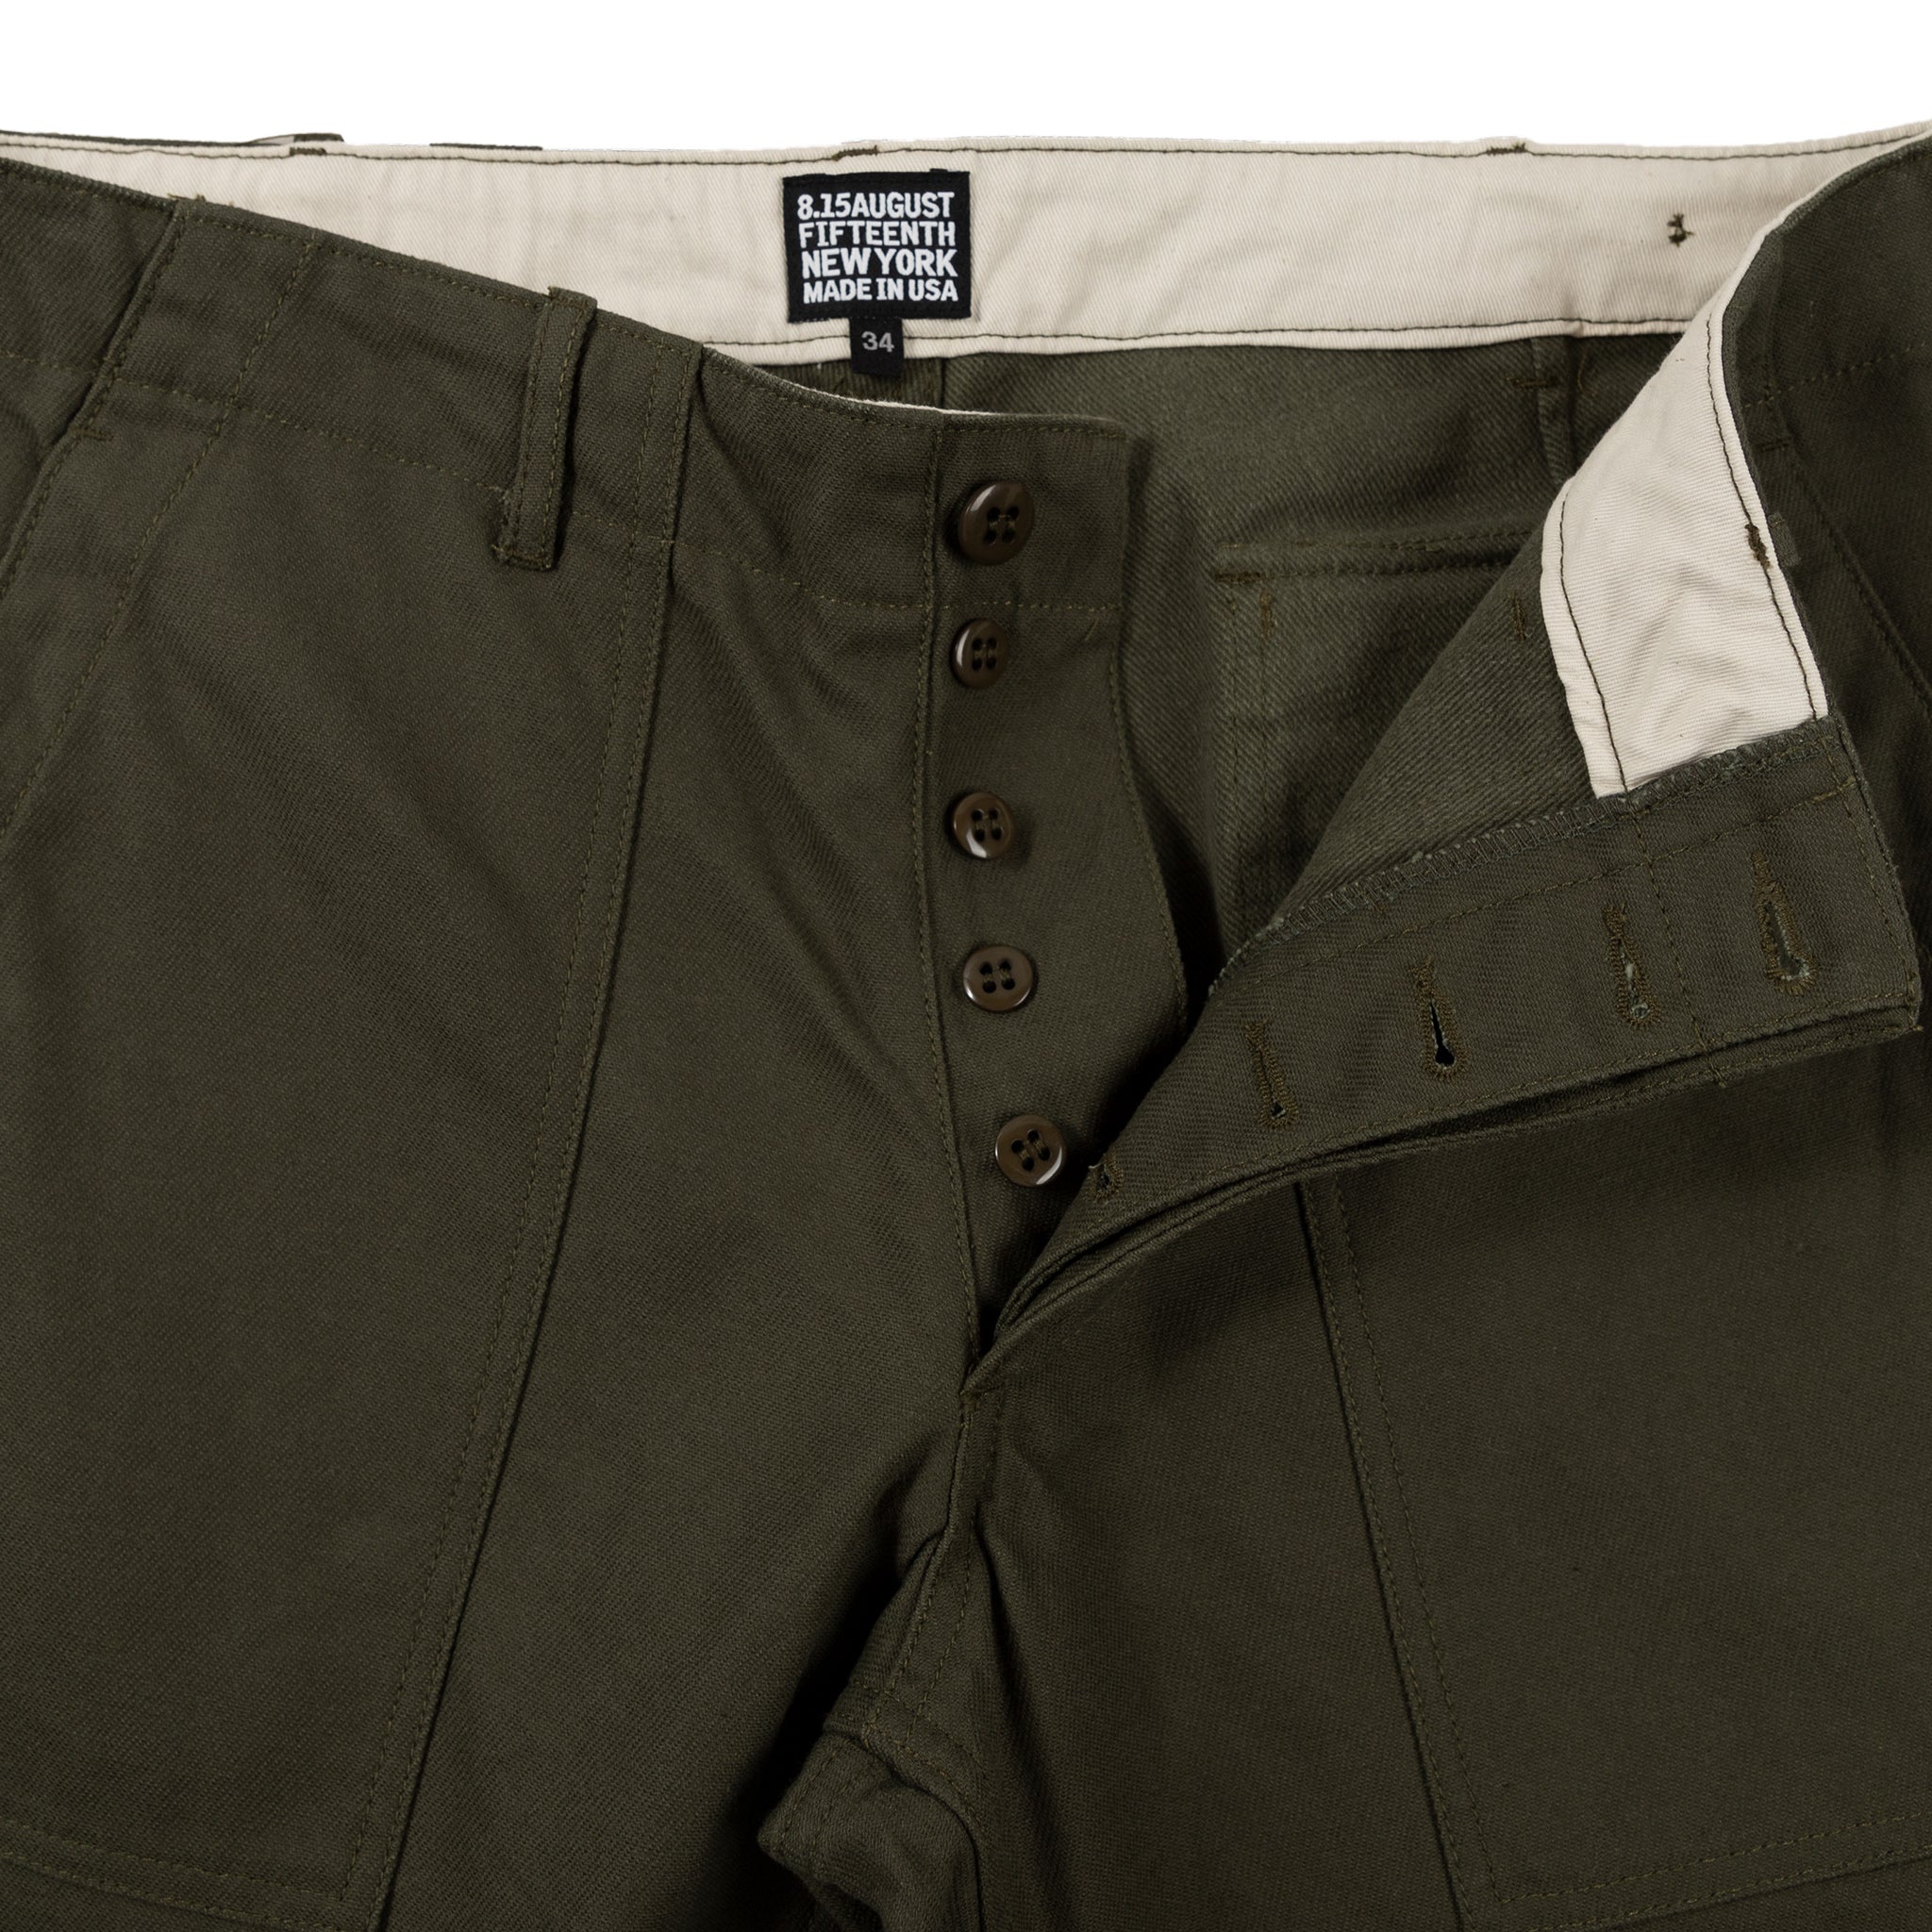 August Fifteenth Fatigue Trousers Back Twill   Olive   Wallace Mercant